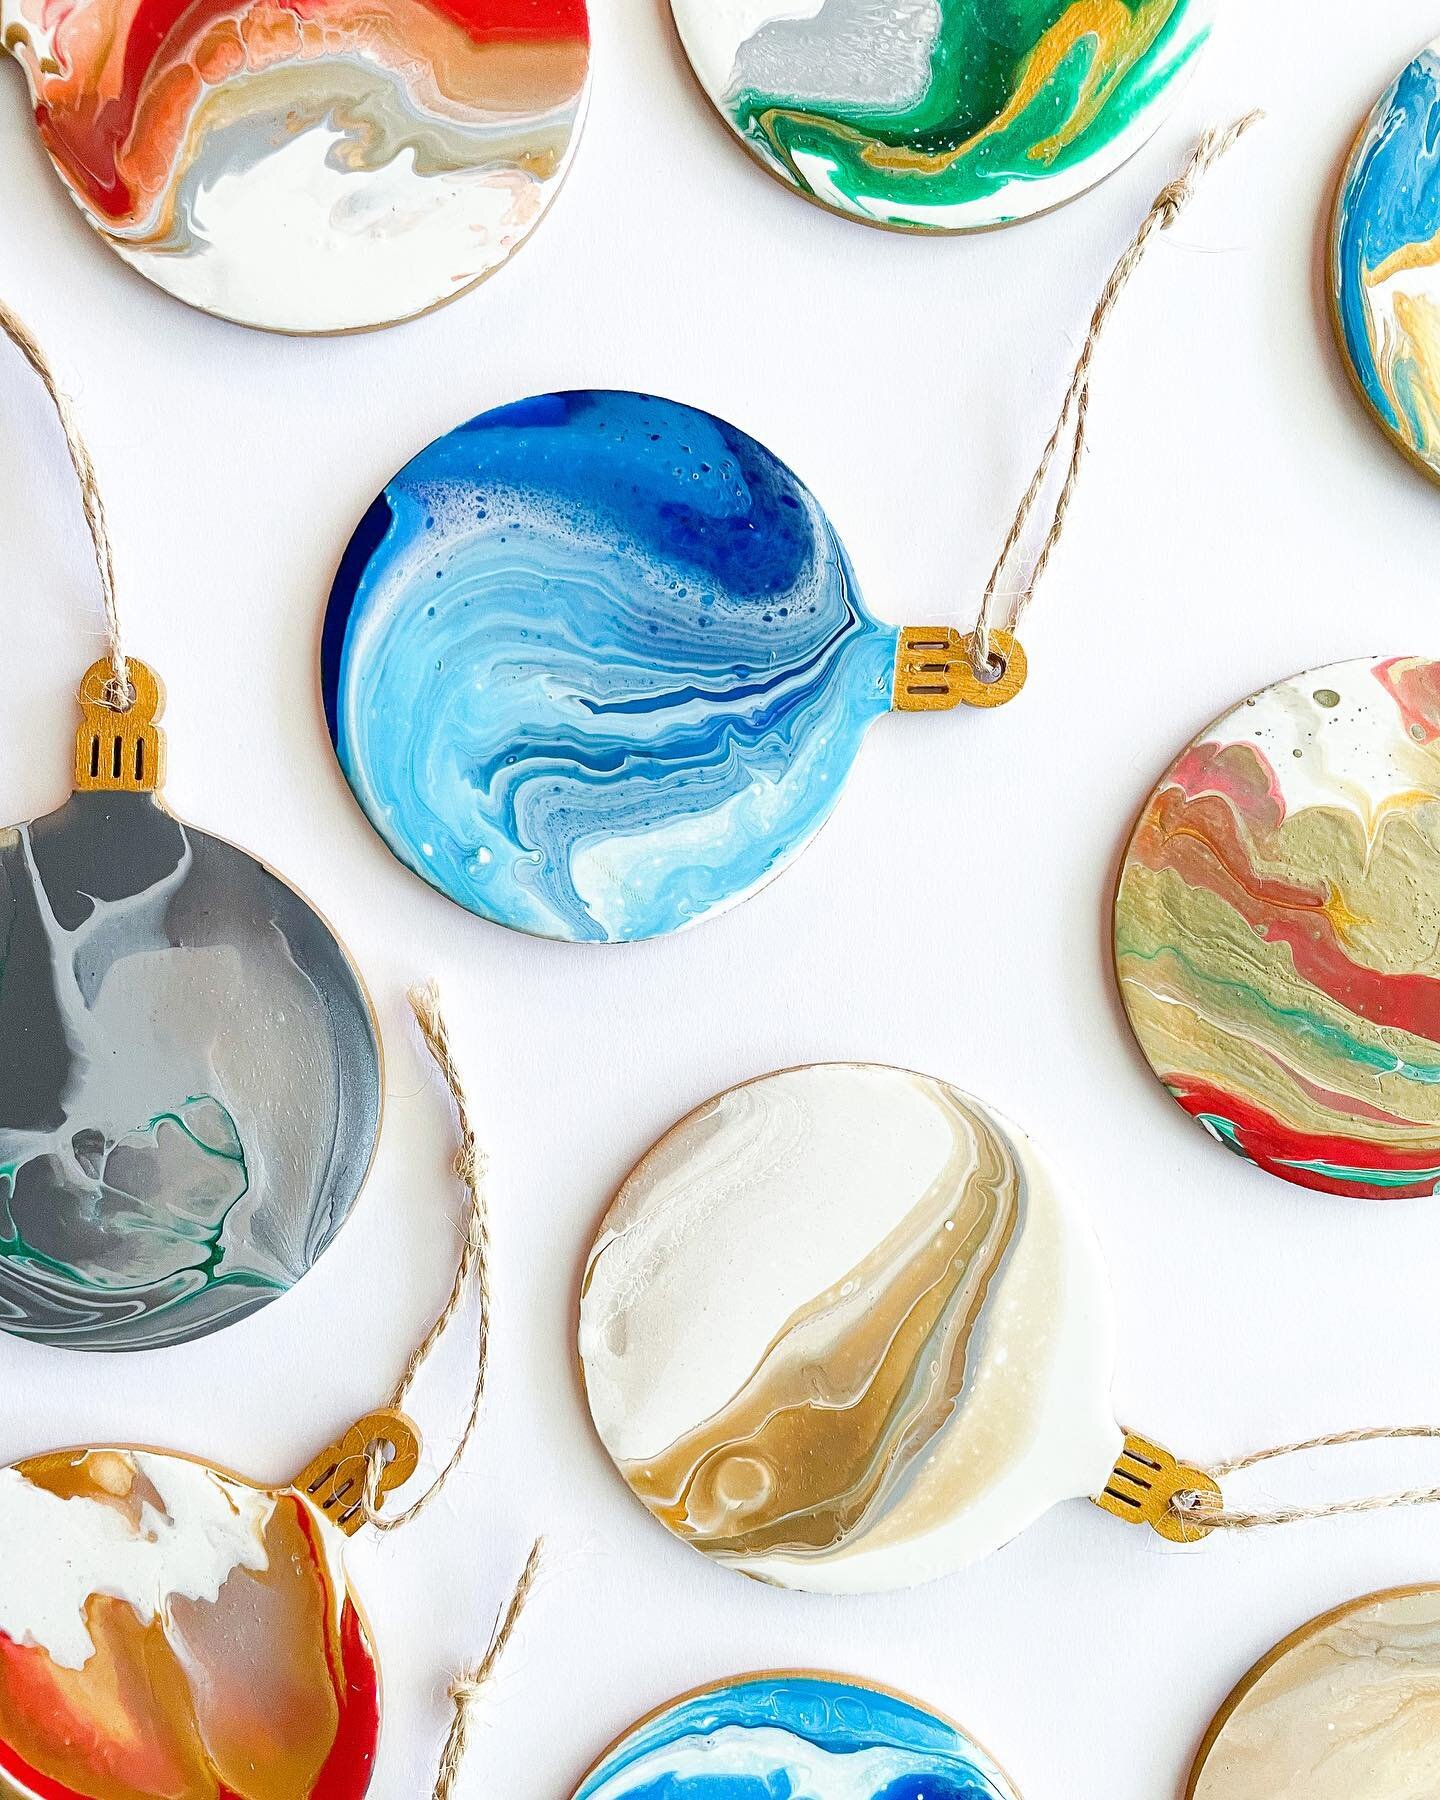 A little snapshot of something I&rsquo;ve been working on this week!

Just like last summer I&rsquo;ll be having a Christmas in July sale! Everything will be discounted including Christmas items.  Fluid ornaments sold out last Christmas- so if you wa